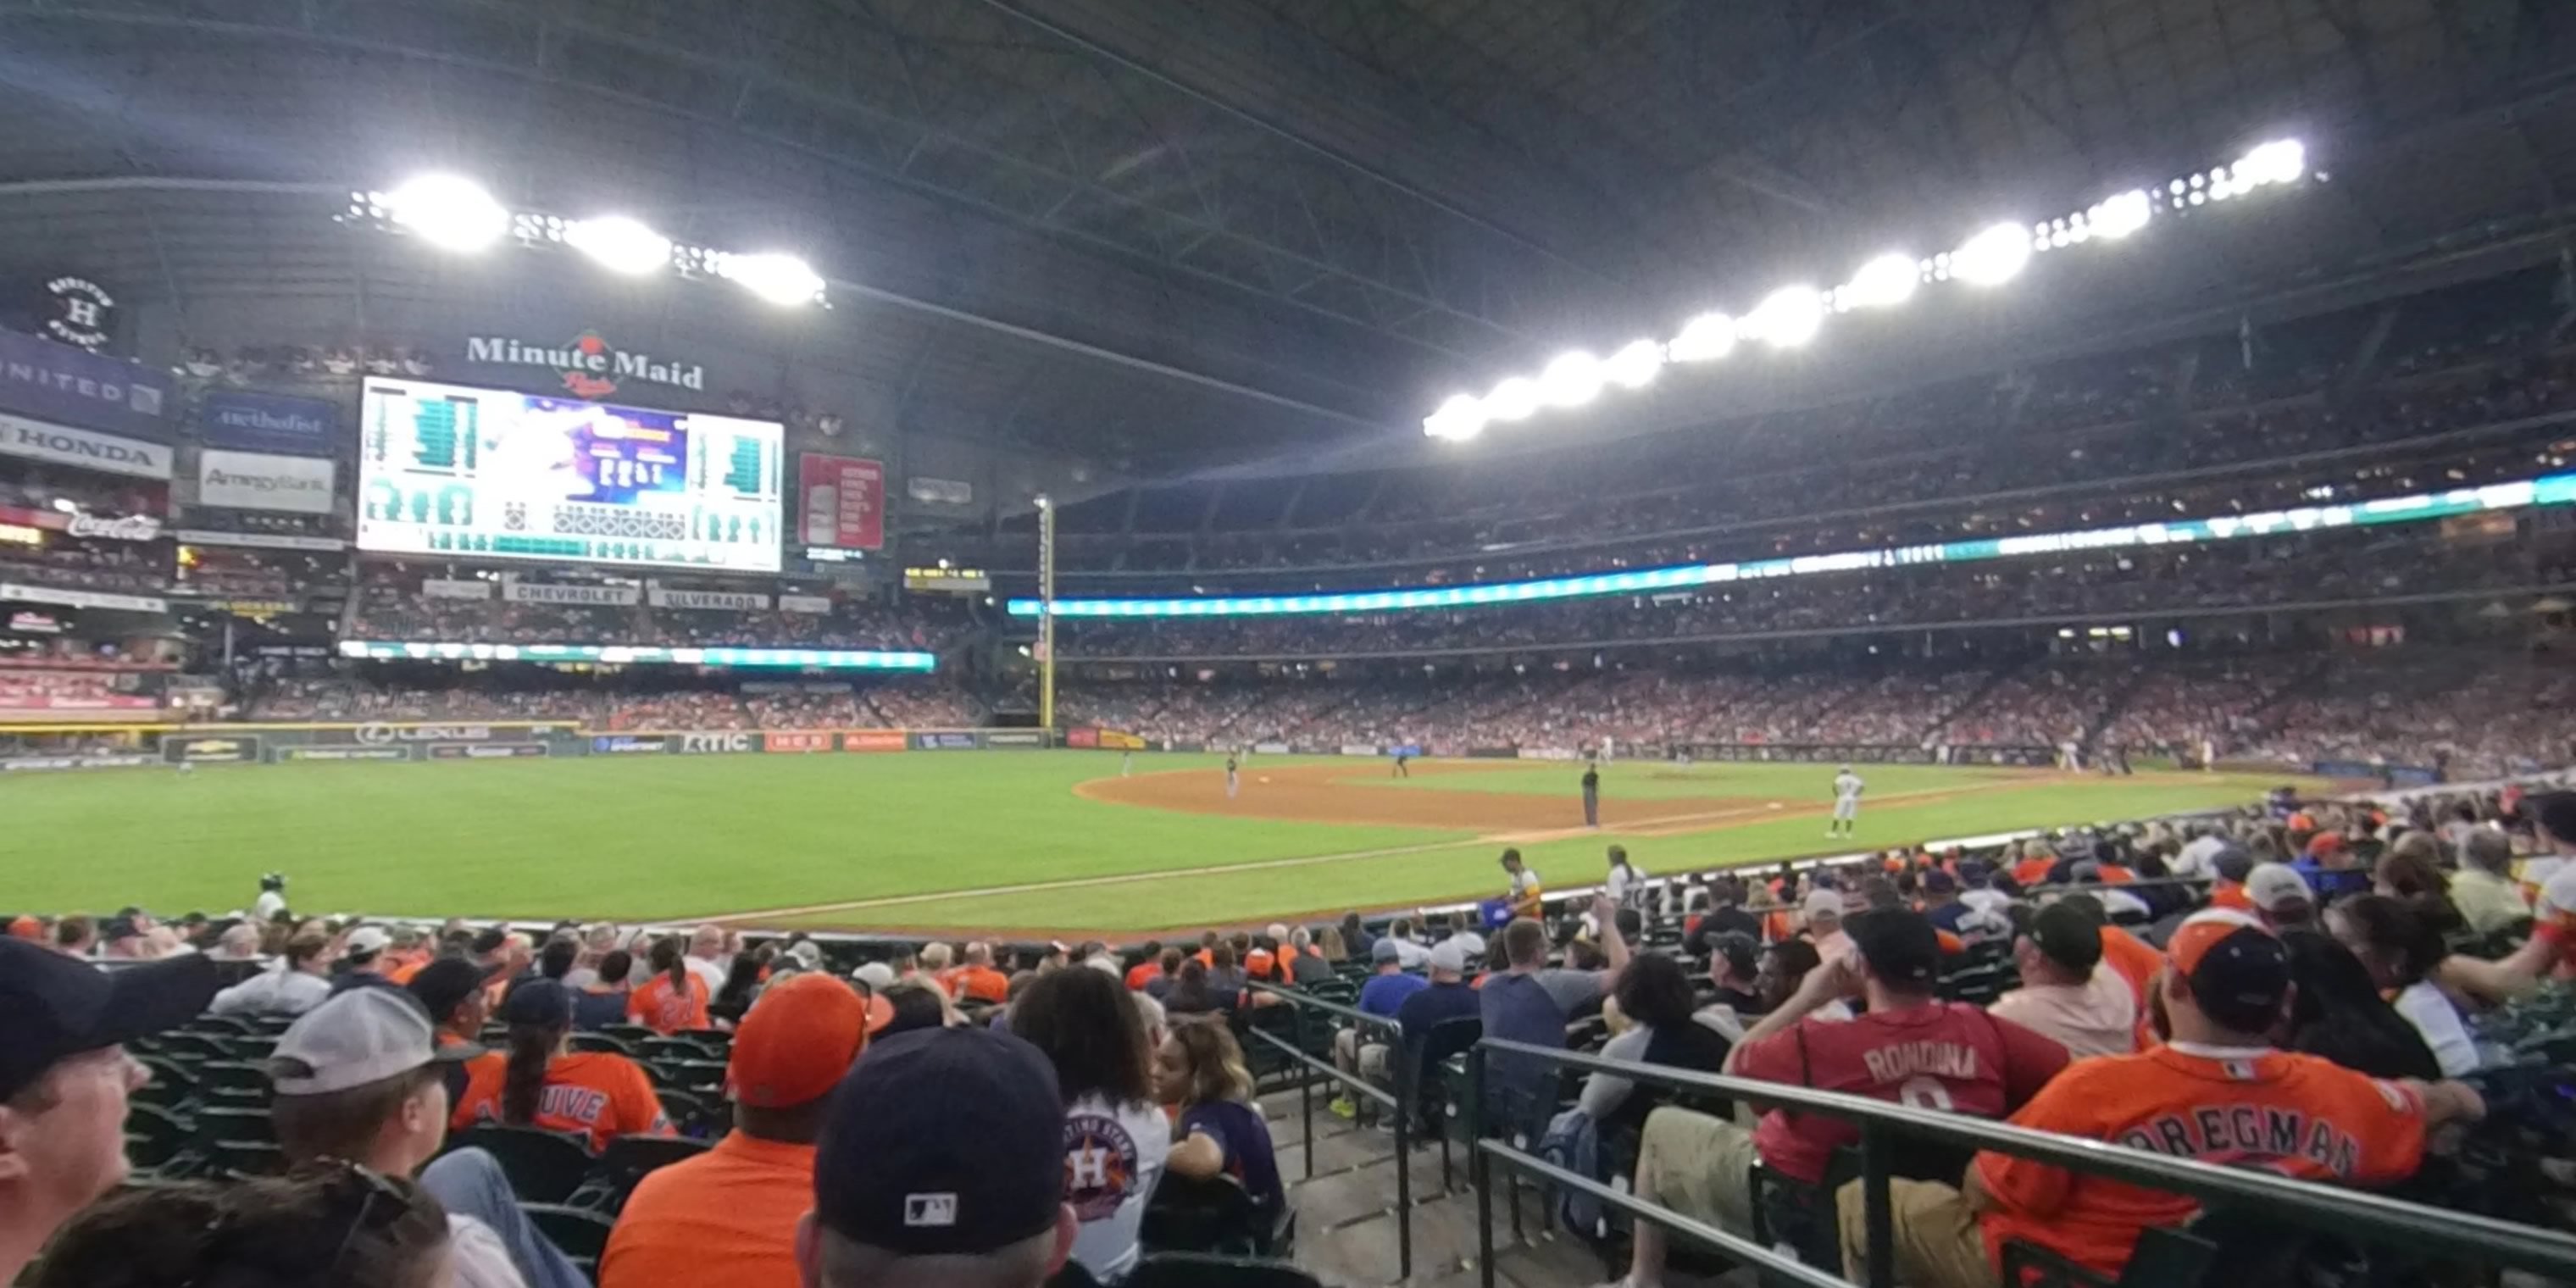 section 108 panoramic seat view  for baseball - minute maid park